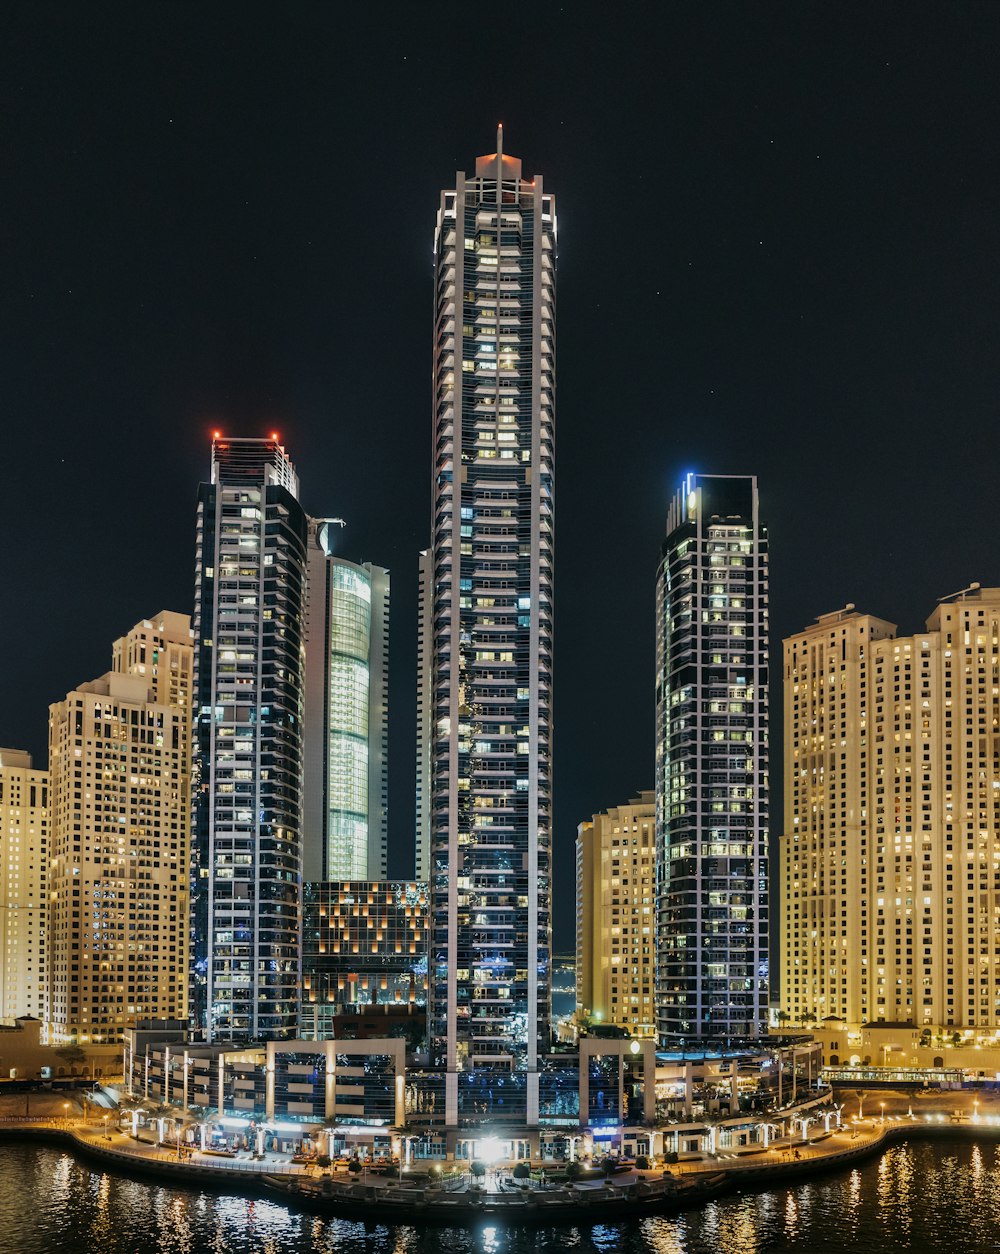 three lighted high-rise buildings near body of water